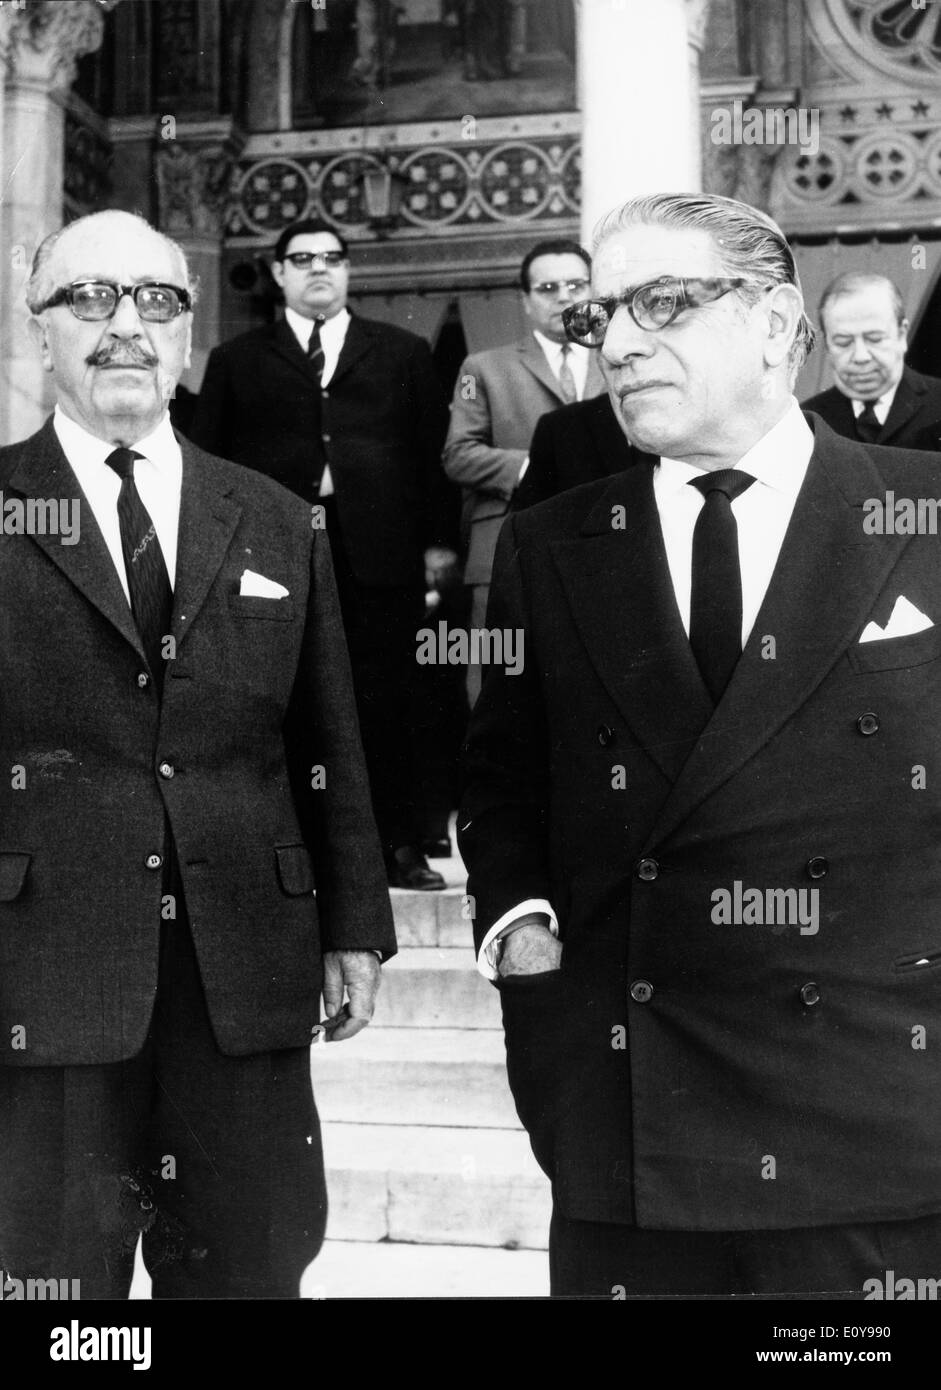 Shipping Magnate Aristotle Onassis with friend Stock Photo